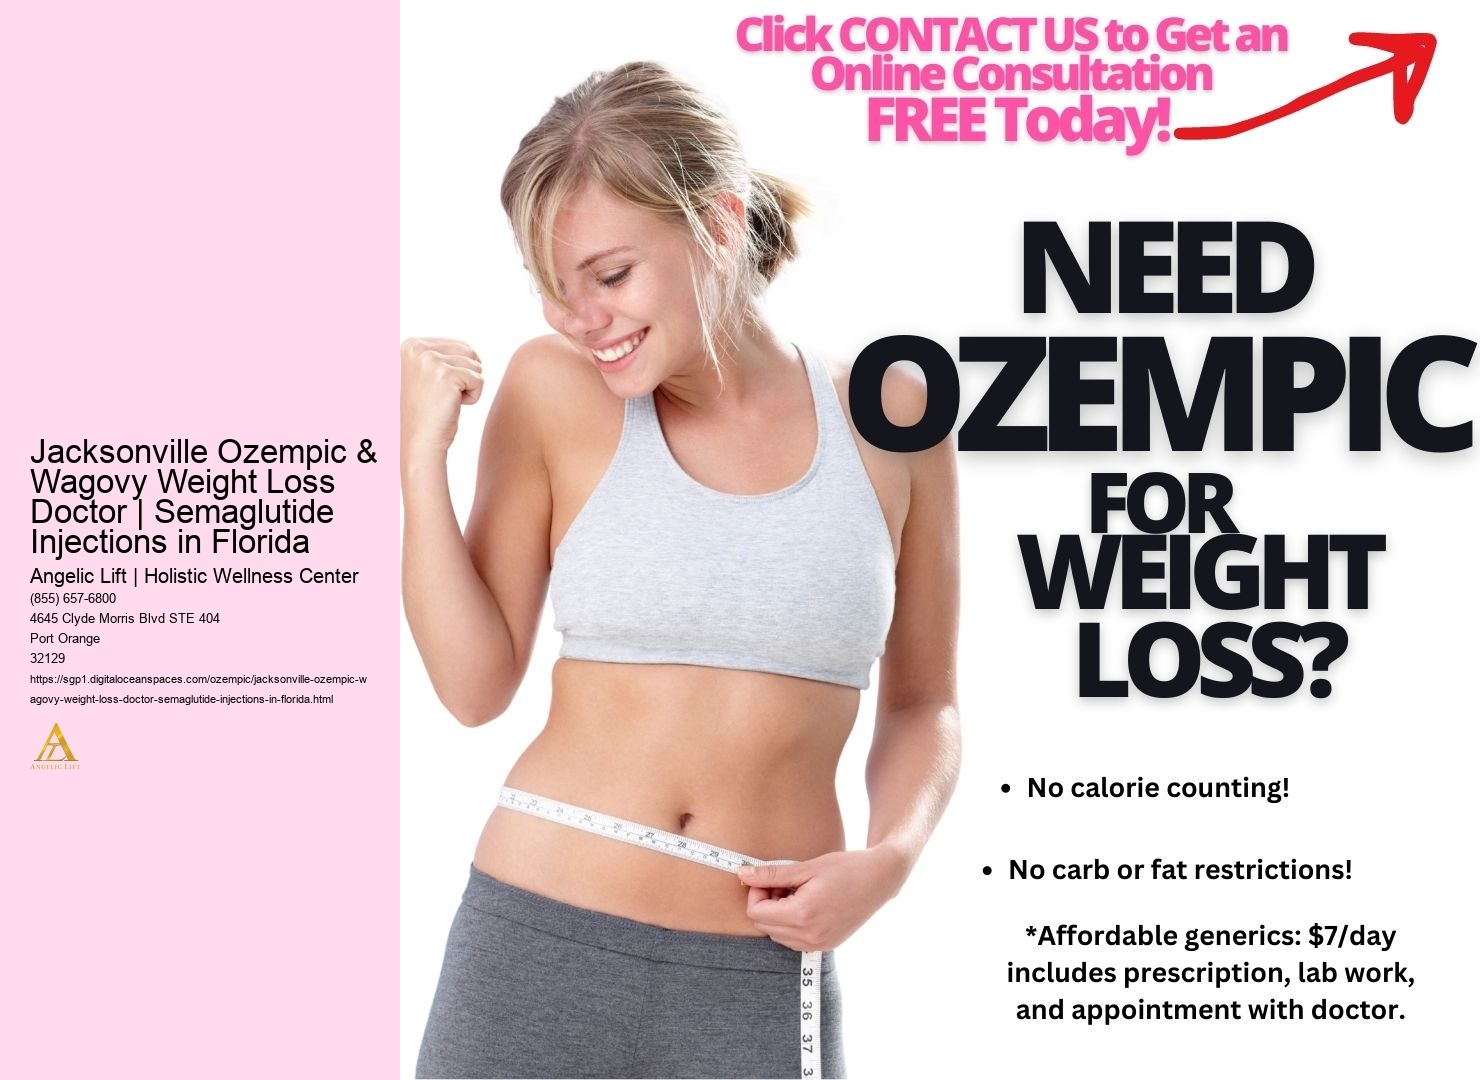 Jacksonville Ozempic & Wagovy Weight Loss Doctor | Semaglutide Injections in Florida